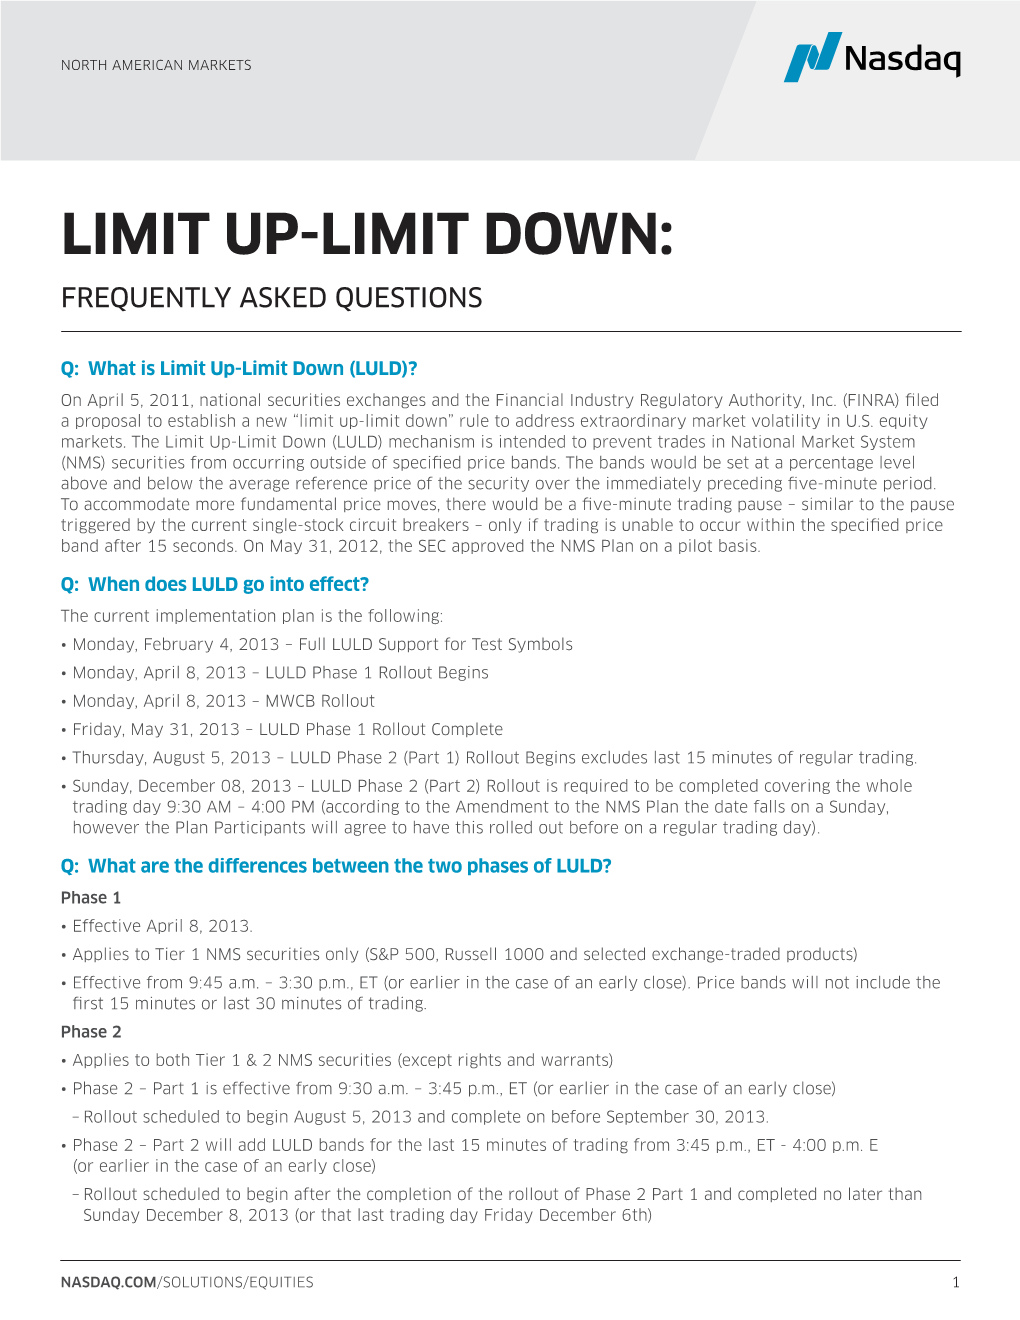 Limit Up-Limit Down (LULD)? on April 5, 2011, National Securities Exchanges and the Financial Industry Regulatory Authority, Inc